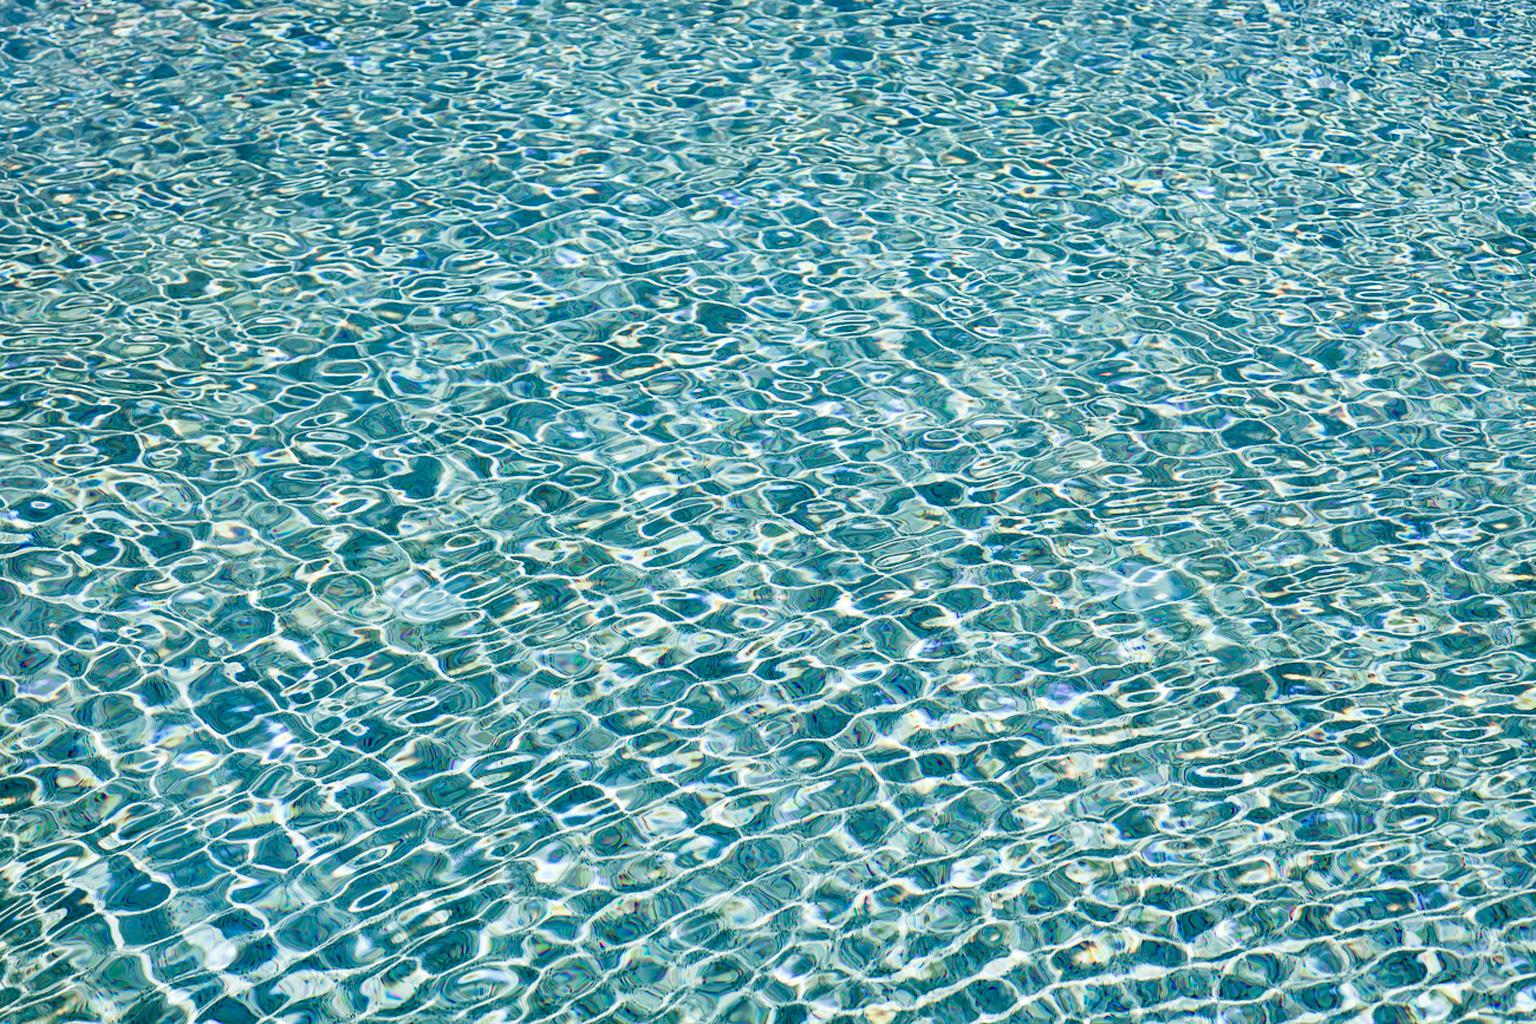 H2O ll -large format photograph of sun reflections on pool water surface